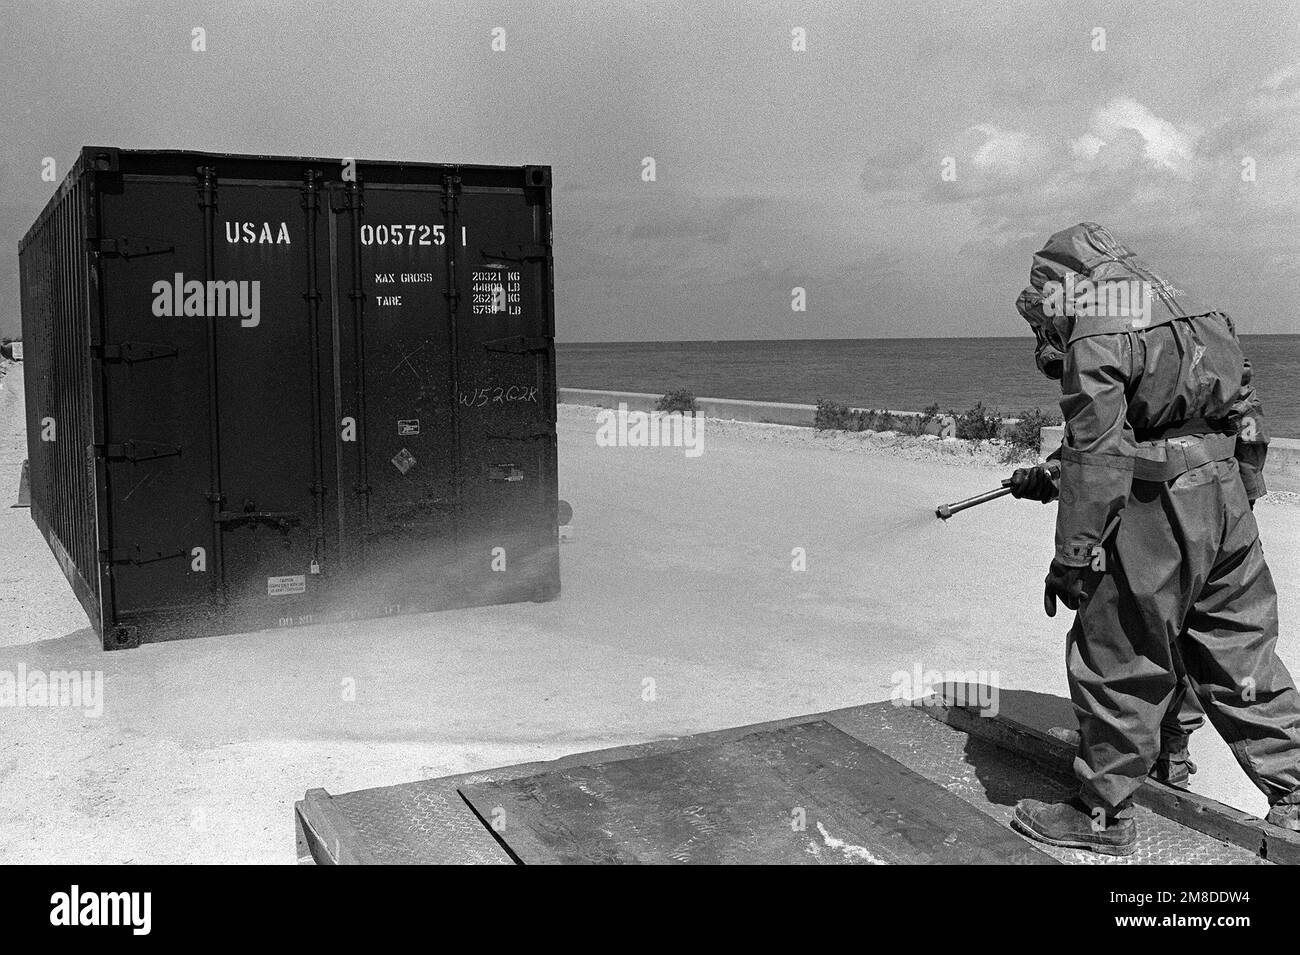 Two soldiers from the 71st Chemical Regiment, 25th Infantry Division (Light), spray a decontamination solution on and around a container express (CONEX) box used to store chemical munitions. The soldiers are taking part in an exercise designed to test the unit's ability to detect and mitigate a chemical leak. Base: US Army Chemical Activity Country: Johnston Atoll Stock Photo